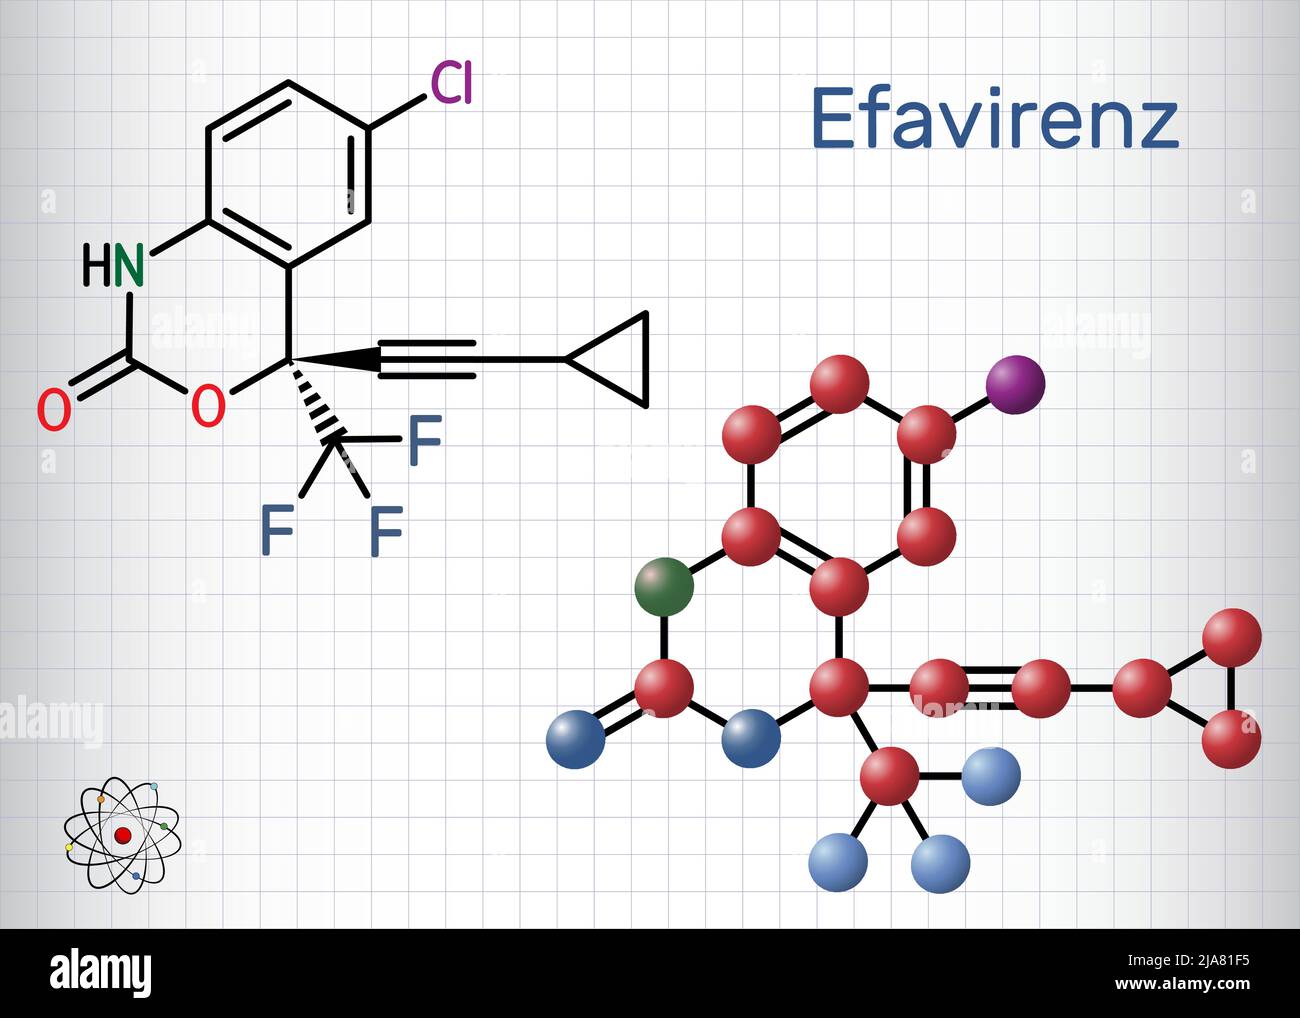 Efavirenz, EFV molecule. It is antiretroviral medication used to treat HIV and AIDS. Structural chemical formula and molecule model. Sheet of paper in Stock Vector